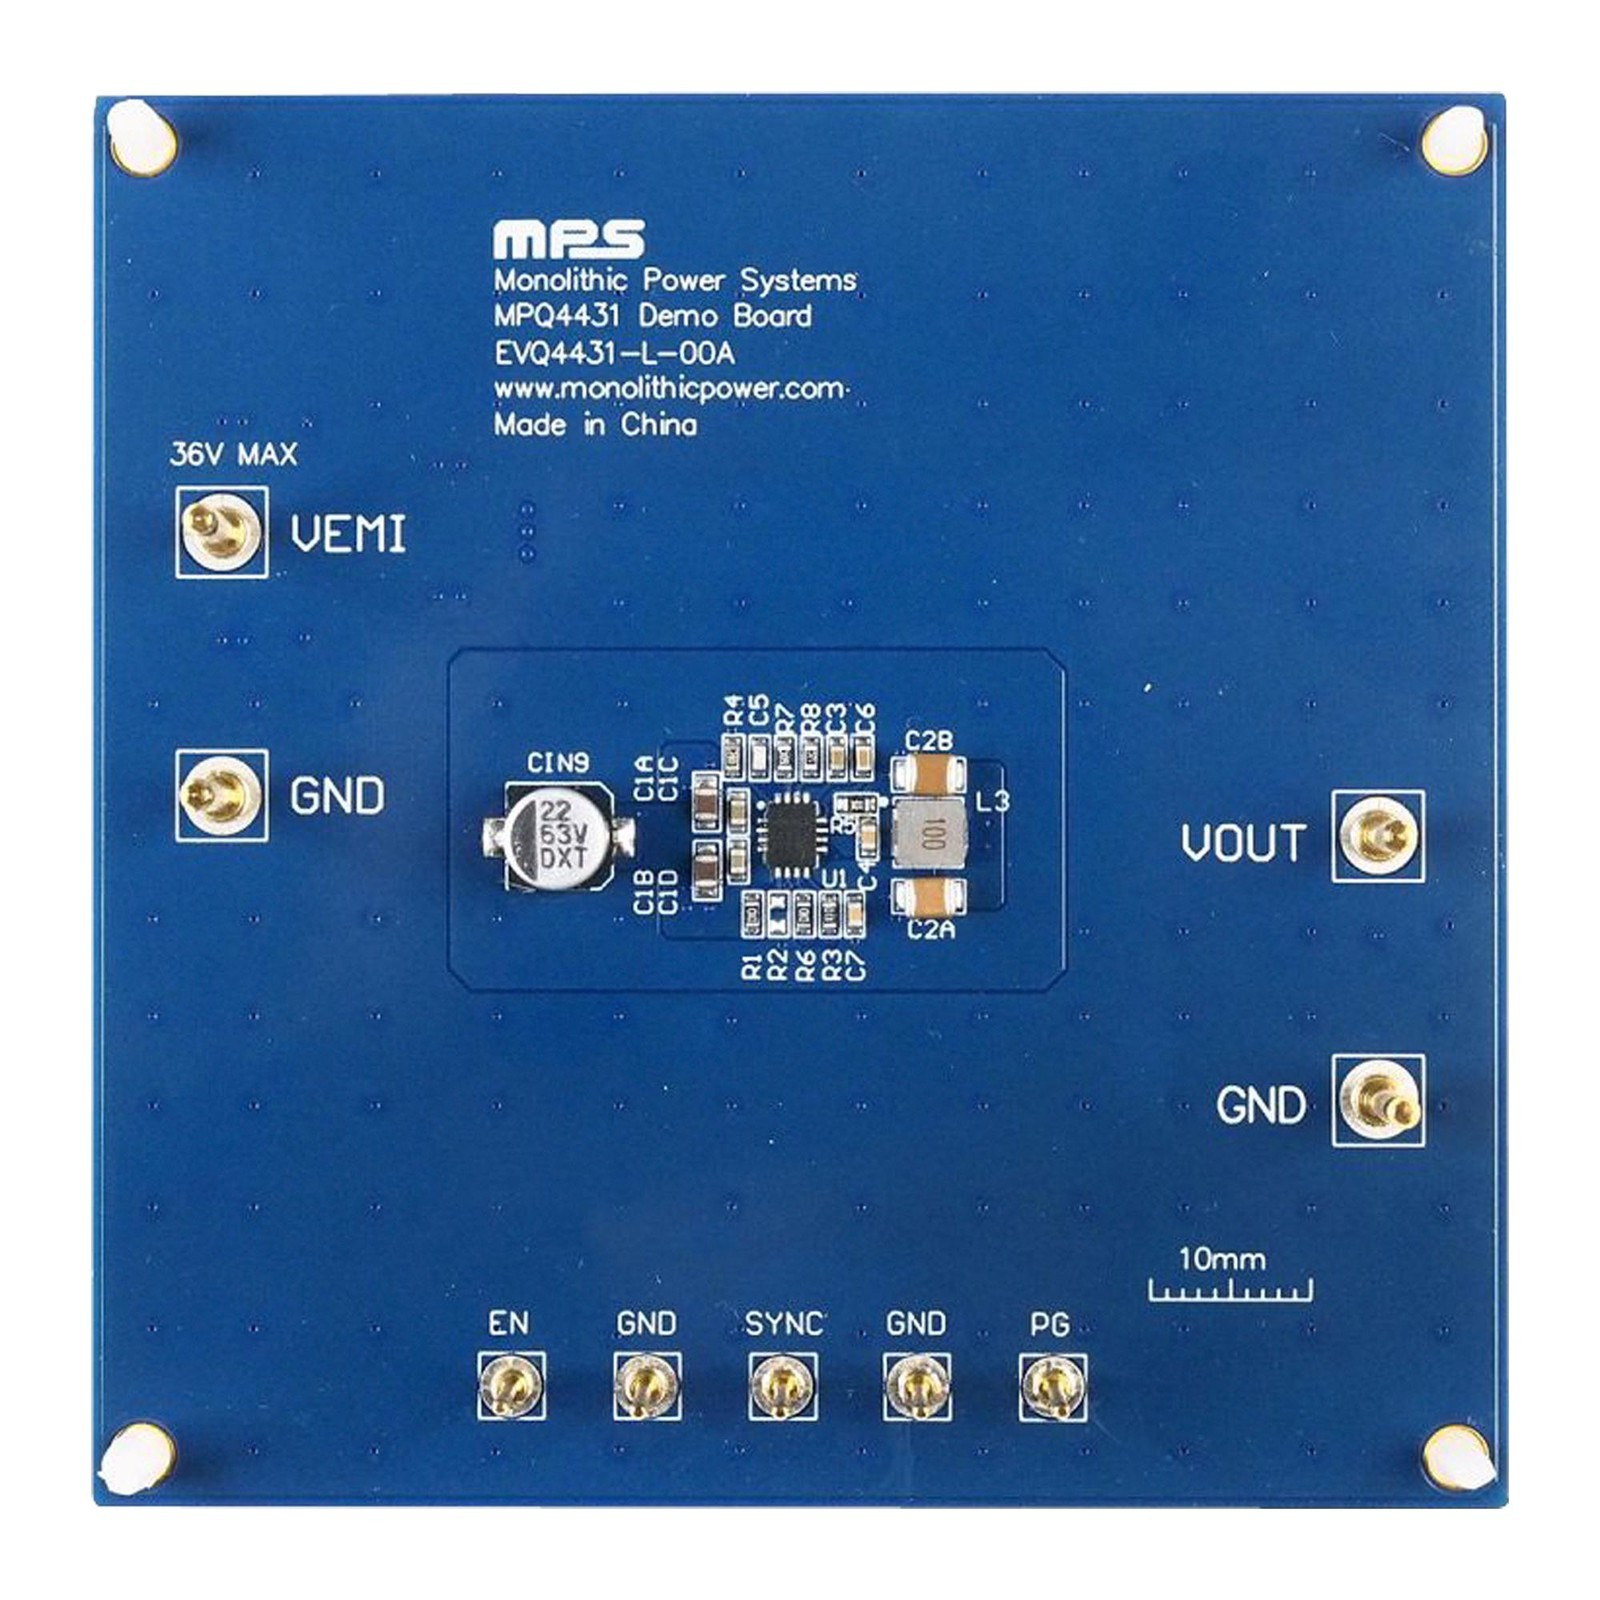 Monolithic Power Systems (Mps) Evq4431-L-00A Eval Board, Synchronous Step Down Conv